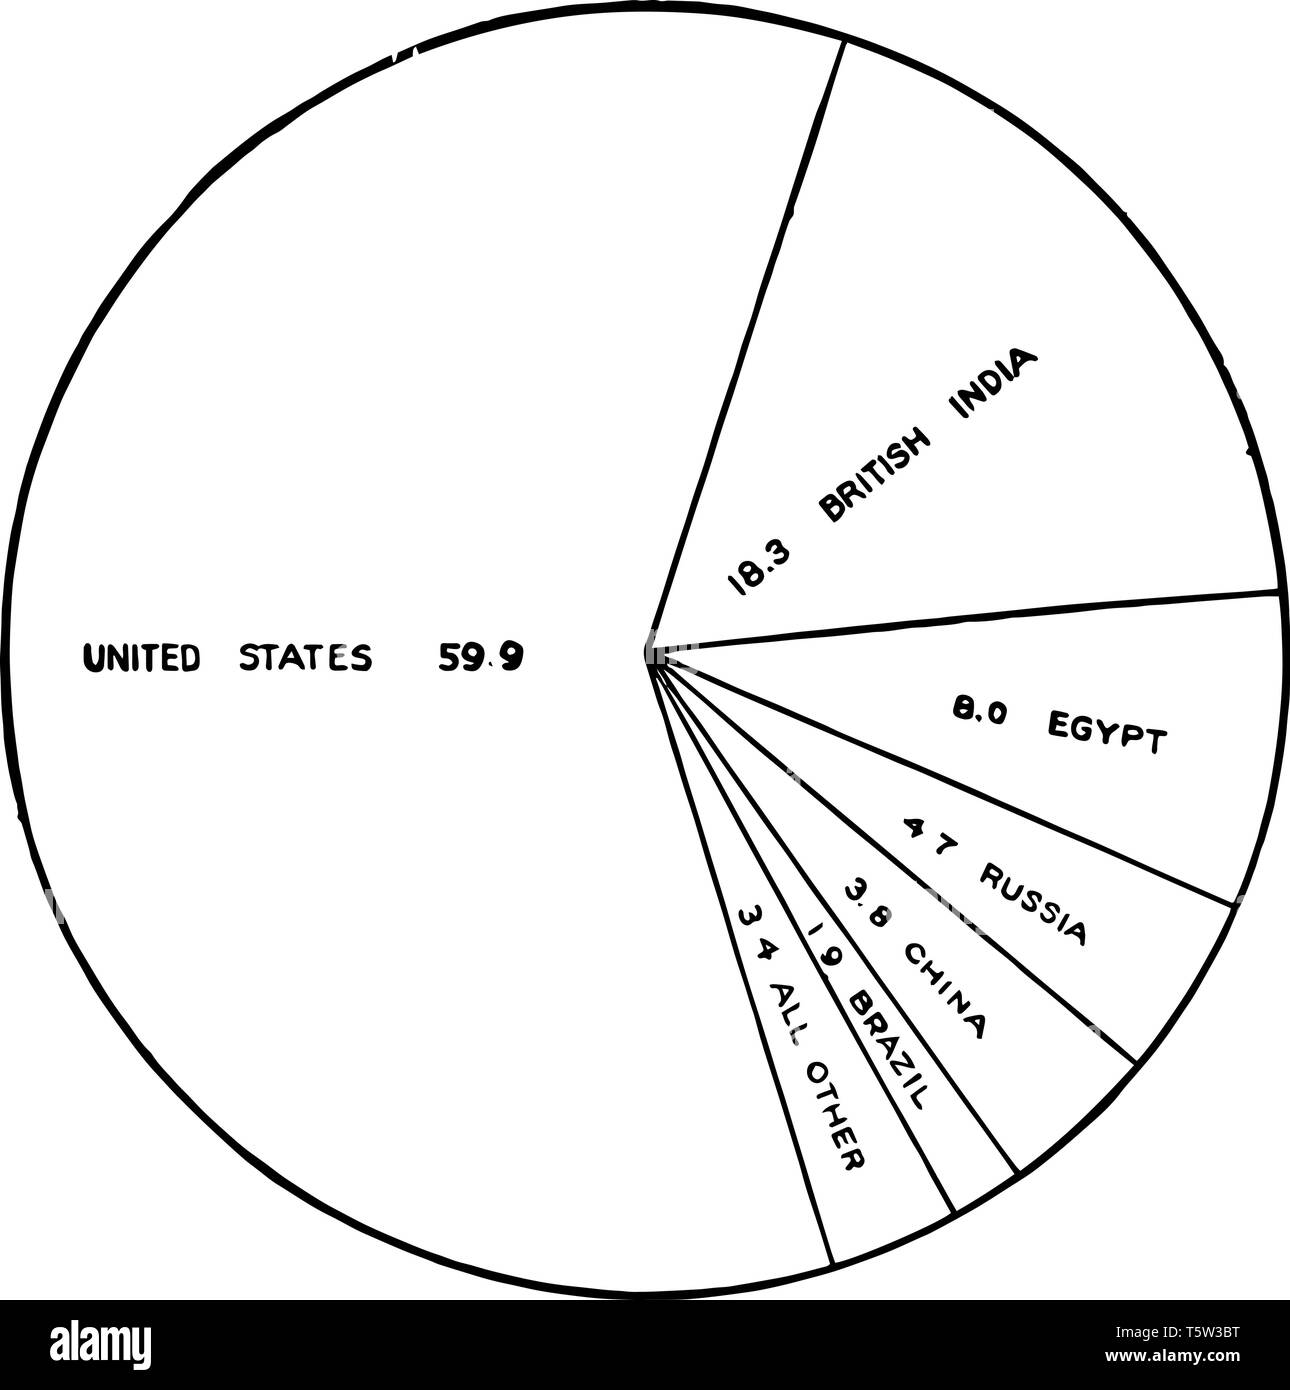 3 Section Pie Chart